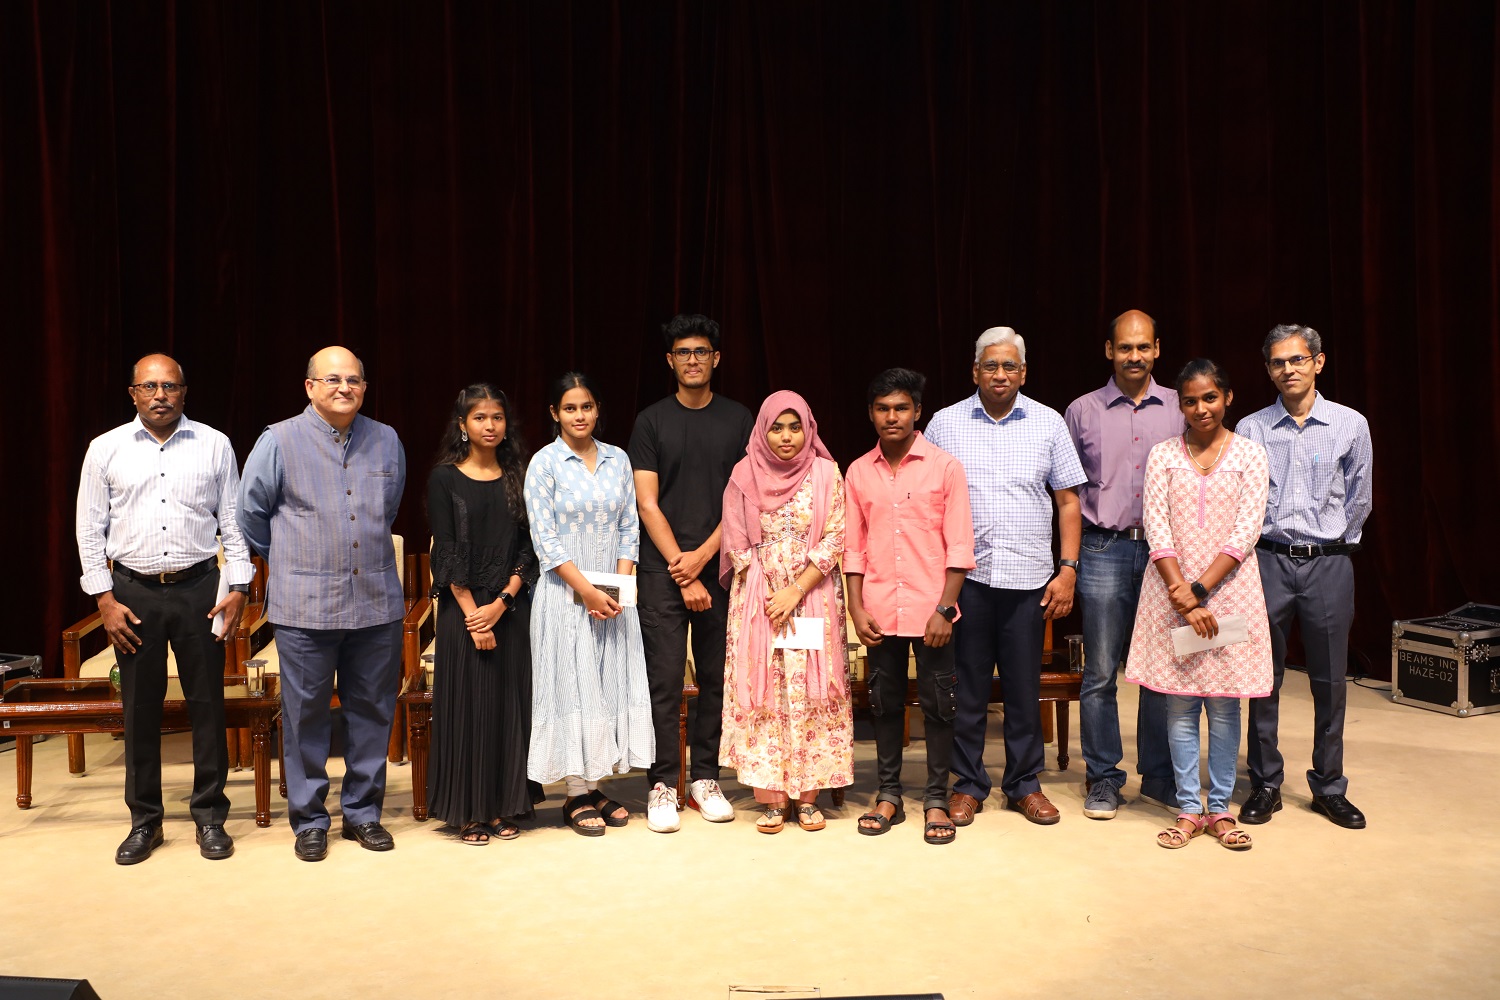 The Class of PGP 2001 has instituted Young Achiever Awards for children of the staff of IIMB. The 2023 Young Achievers are seen with representatives of the PGP 2001 Batch, Director Prof. RT Krishnan, Dean (Admin) Prof. Rajendra Bandi and CAO Col (Retd) SD Aravendan. The awardees were felicitated on 27th October 2023.